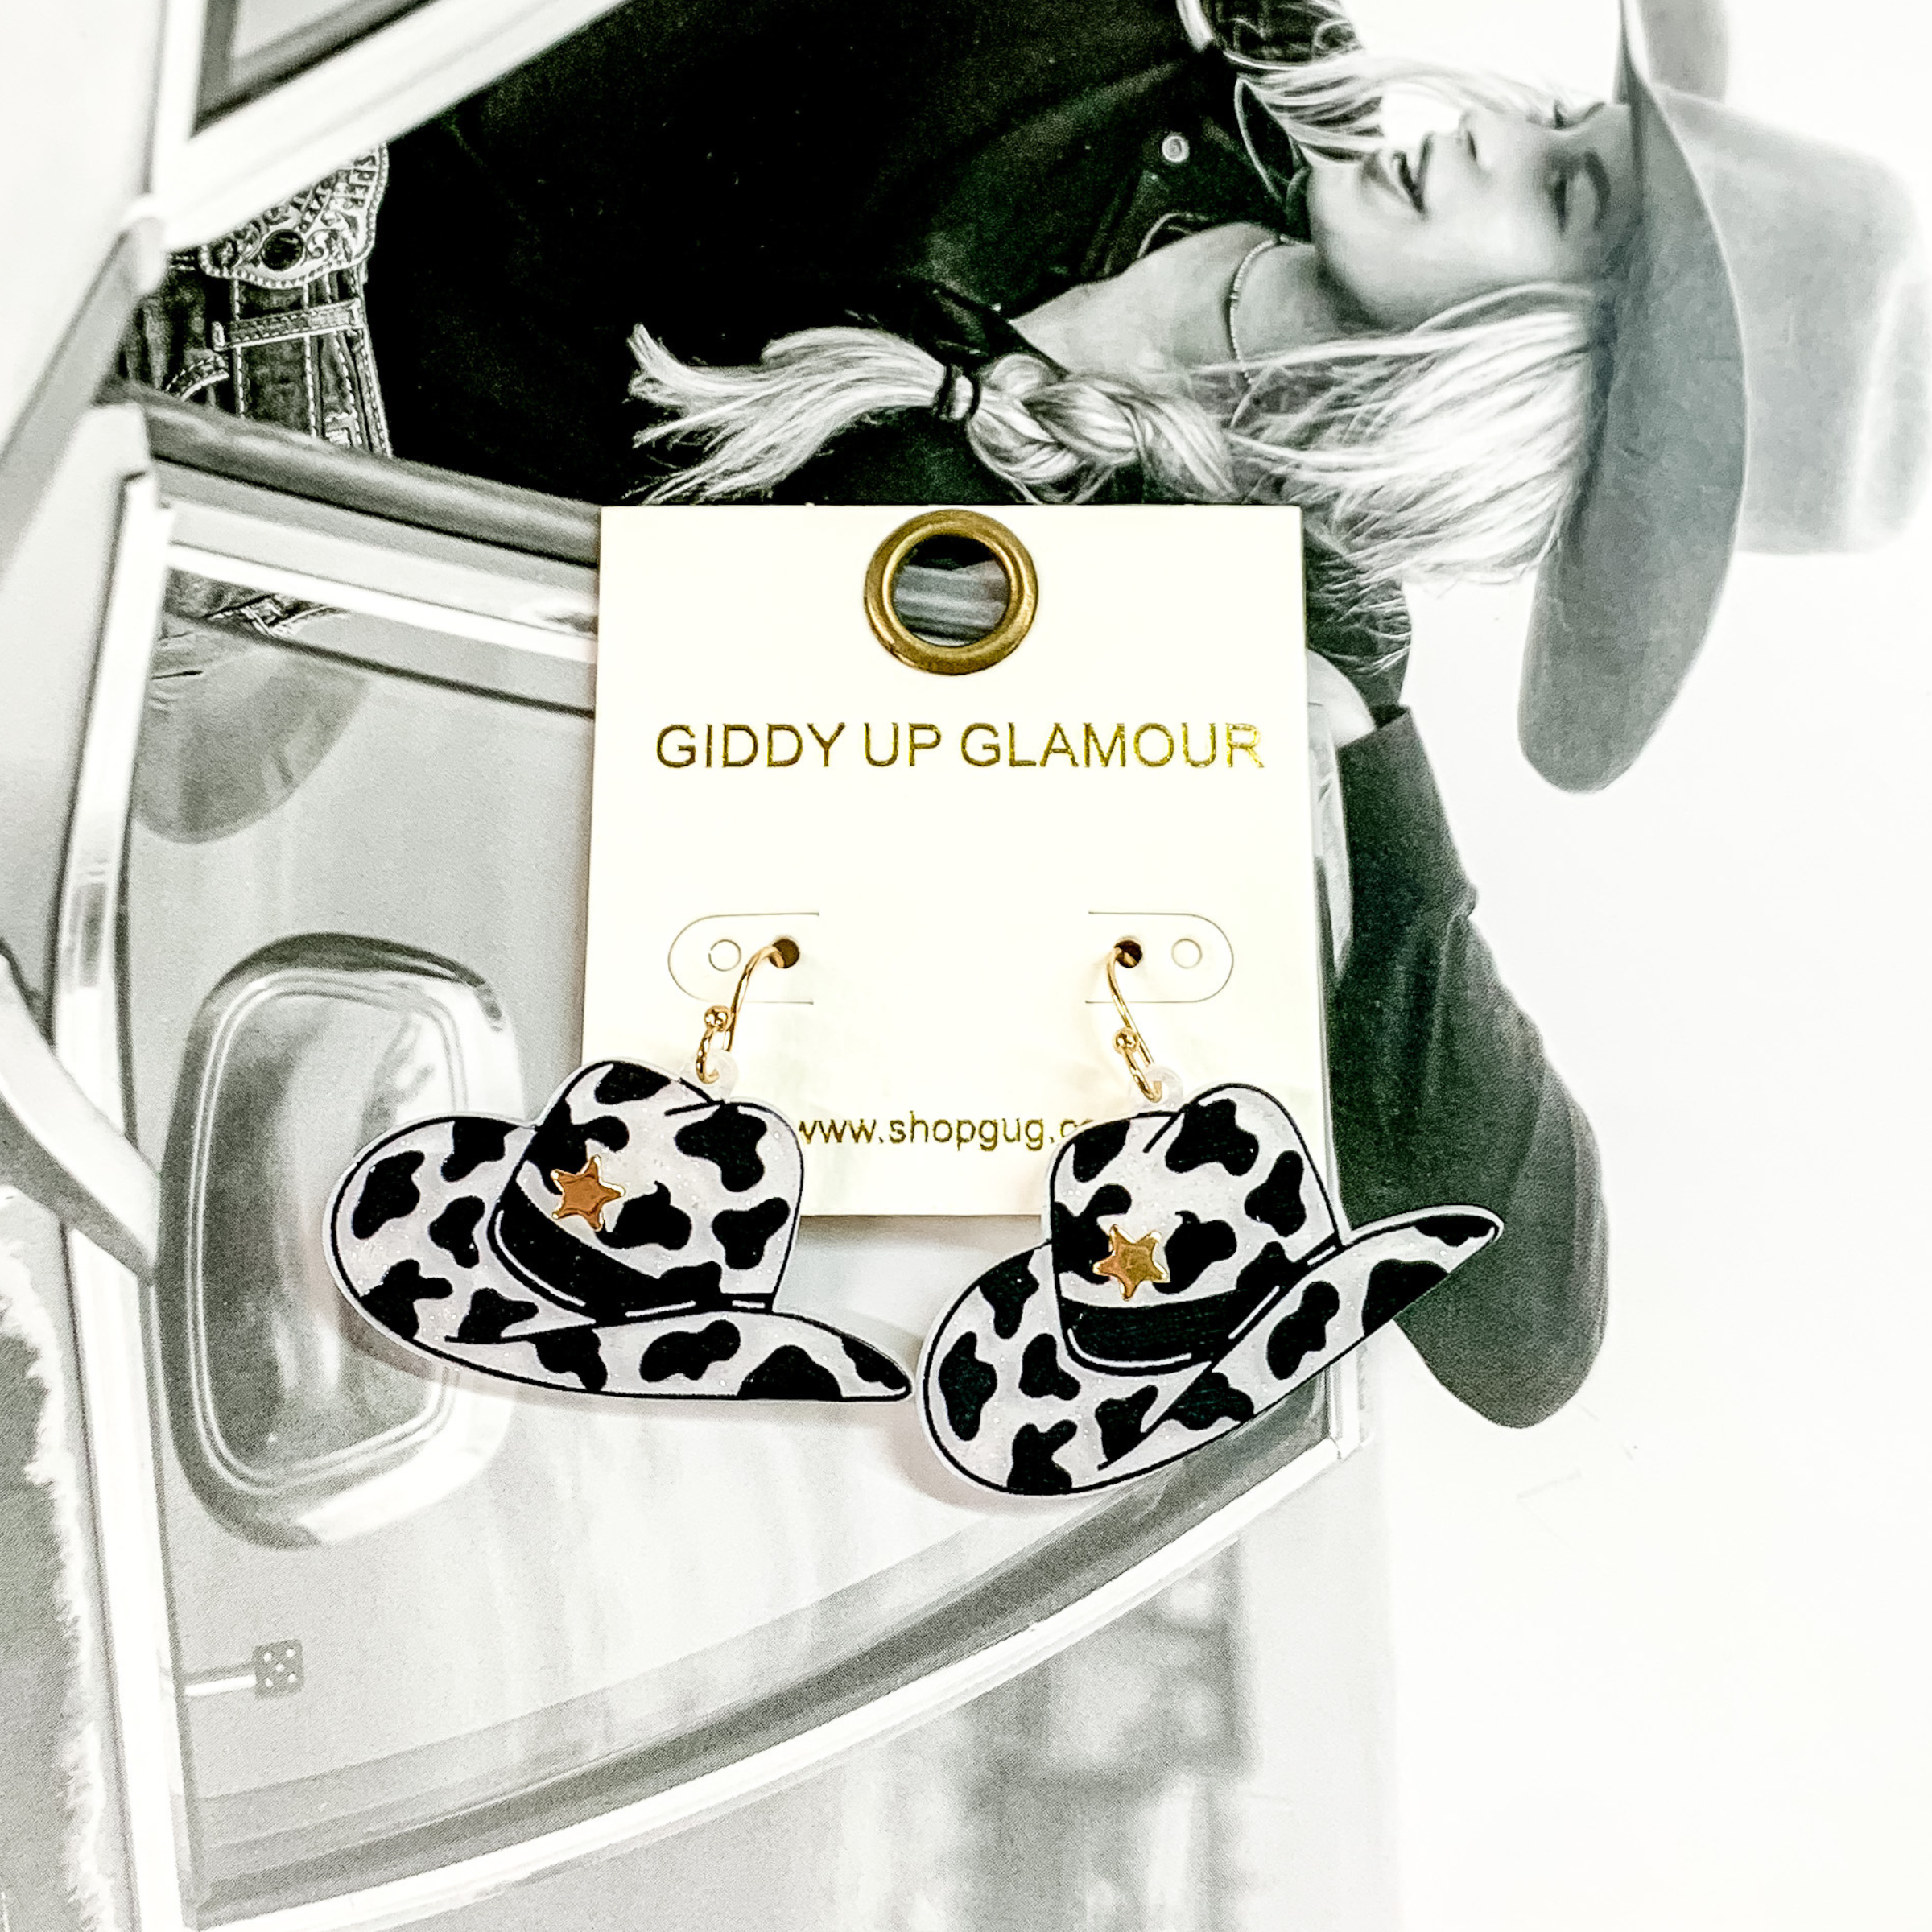 Cowboy hat dangle earrings pictured on a white earrings holder. These earrings have a black cow print on a white, glitter background with a gold star on the front of the hat. These earrings are pictured on a black and white picture of a girl. 